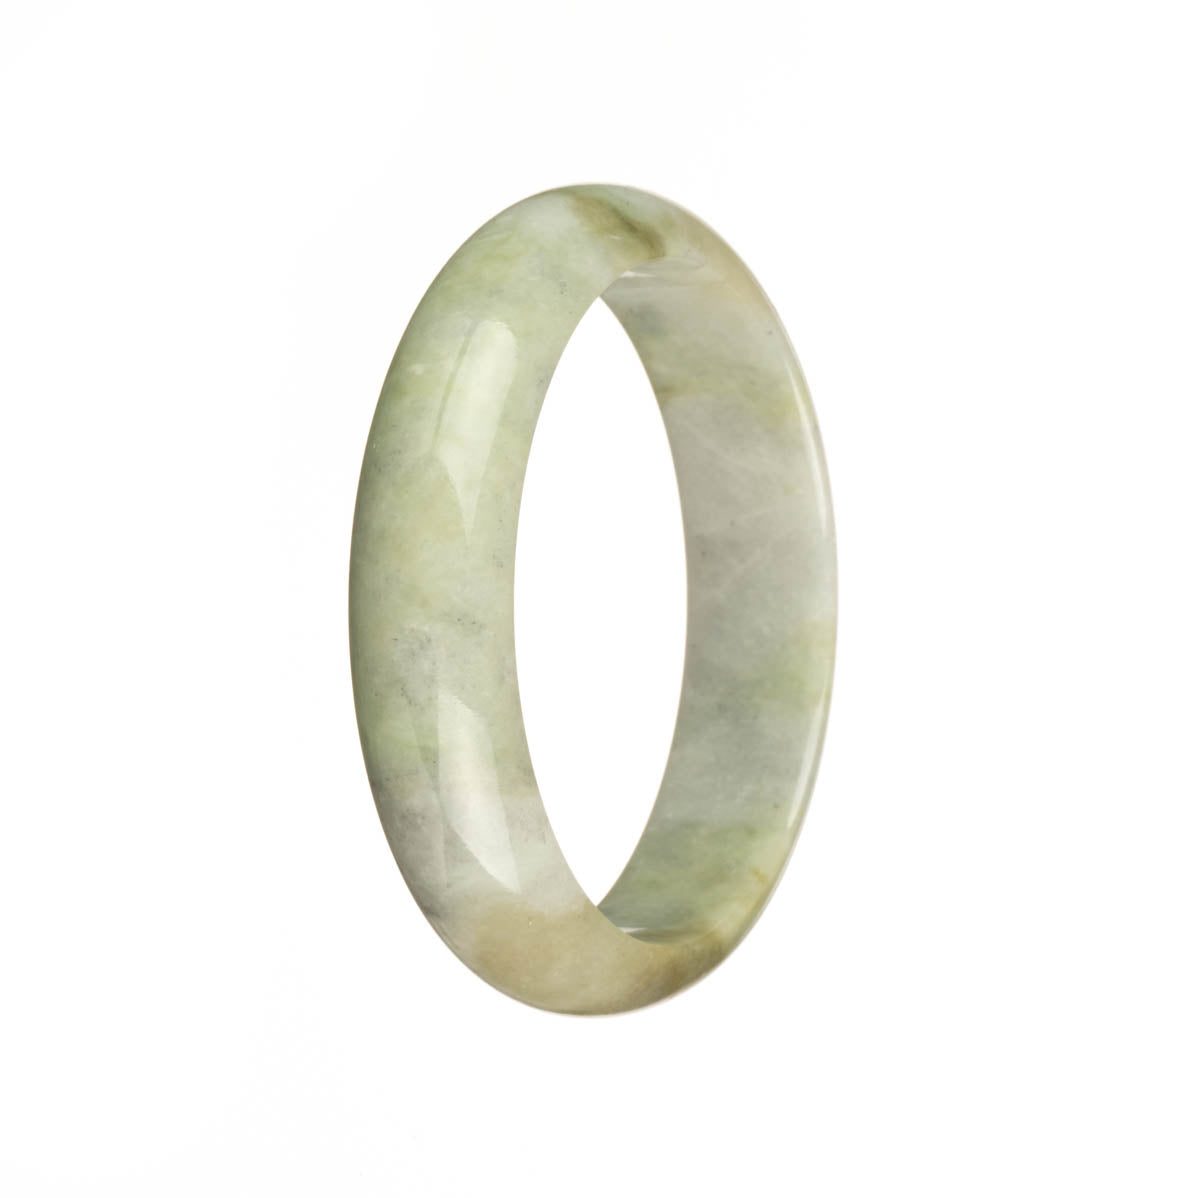 Genuine Grade A Pale Green with Olive Green Pattren Traditional Jade Bangle Bracelet - 54mm Half Moon